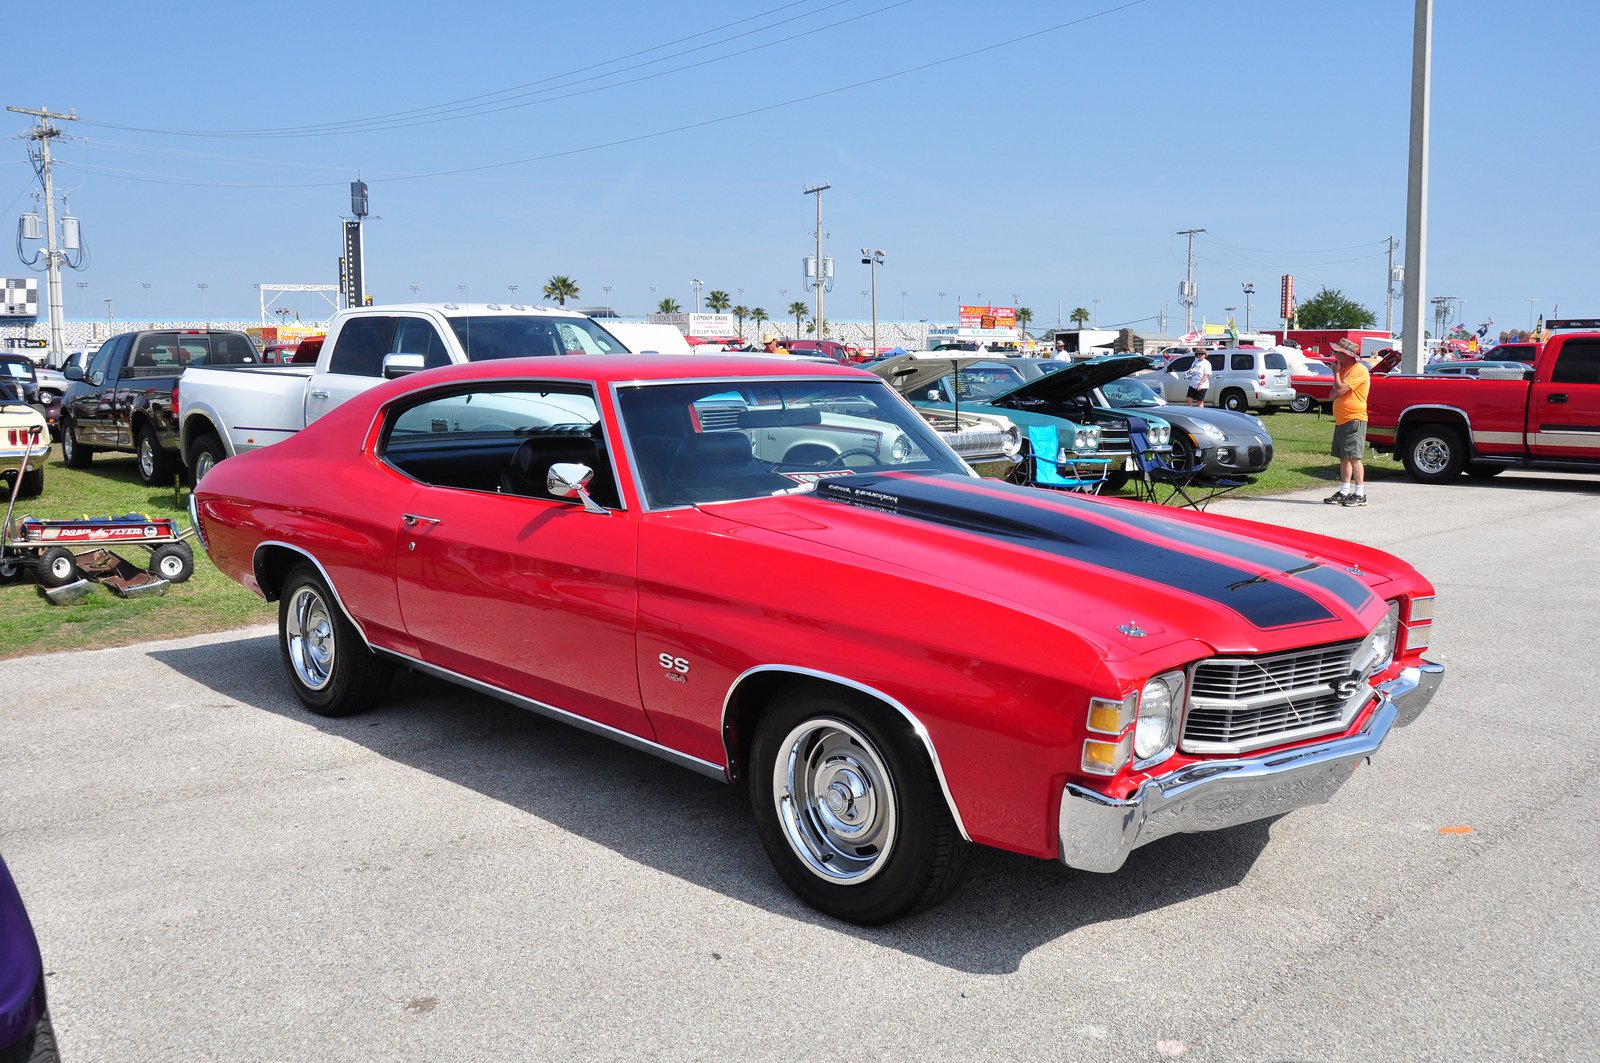 chevelle, Chevrolet, Chevy, Malibu, Cars, Muscle, Vintage, El, Camino, Usa, Coupe Wallpaper